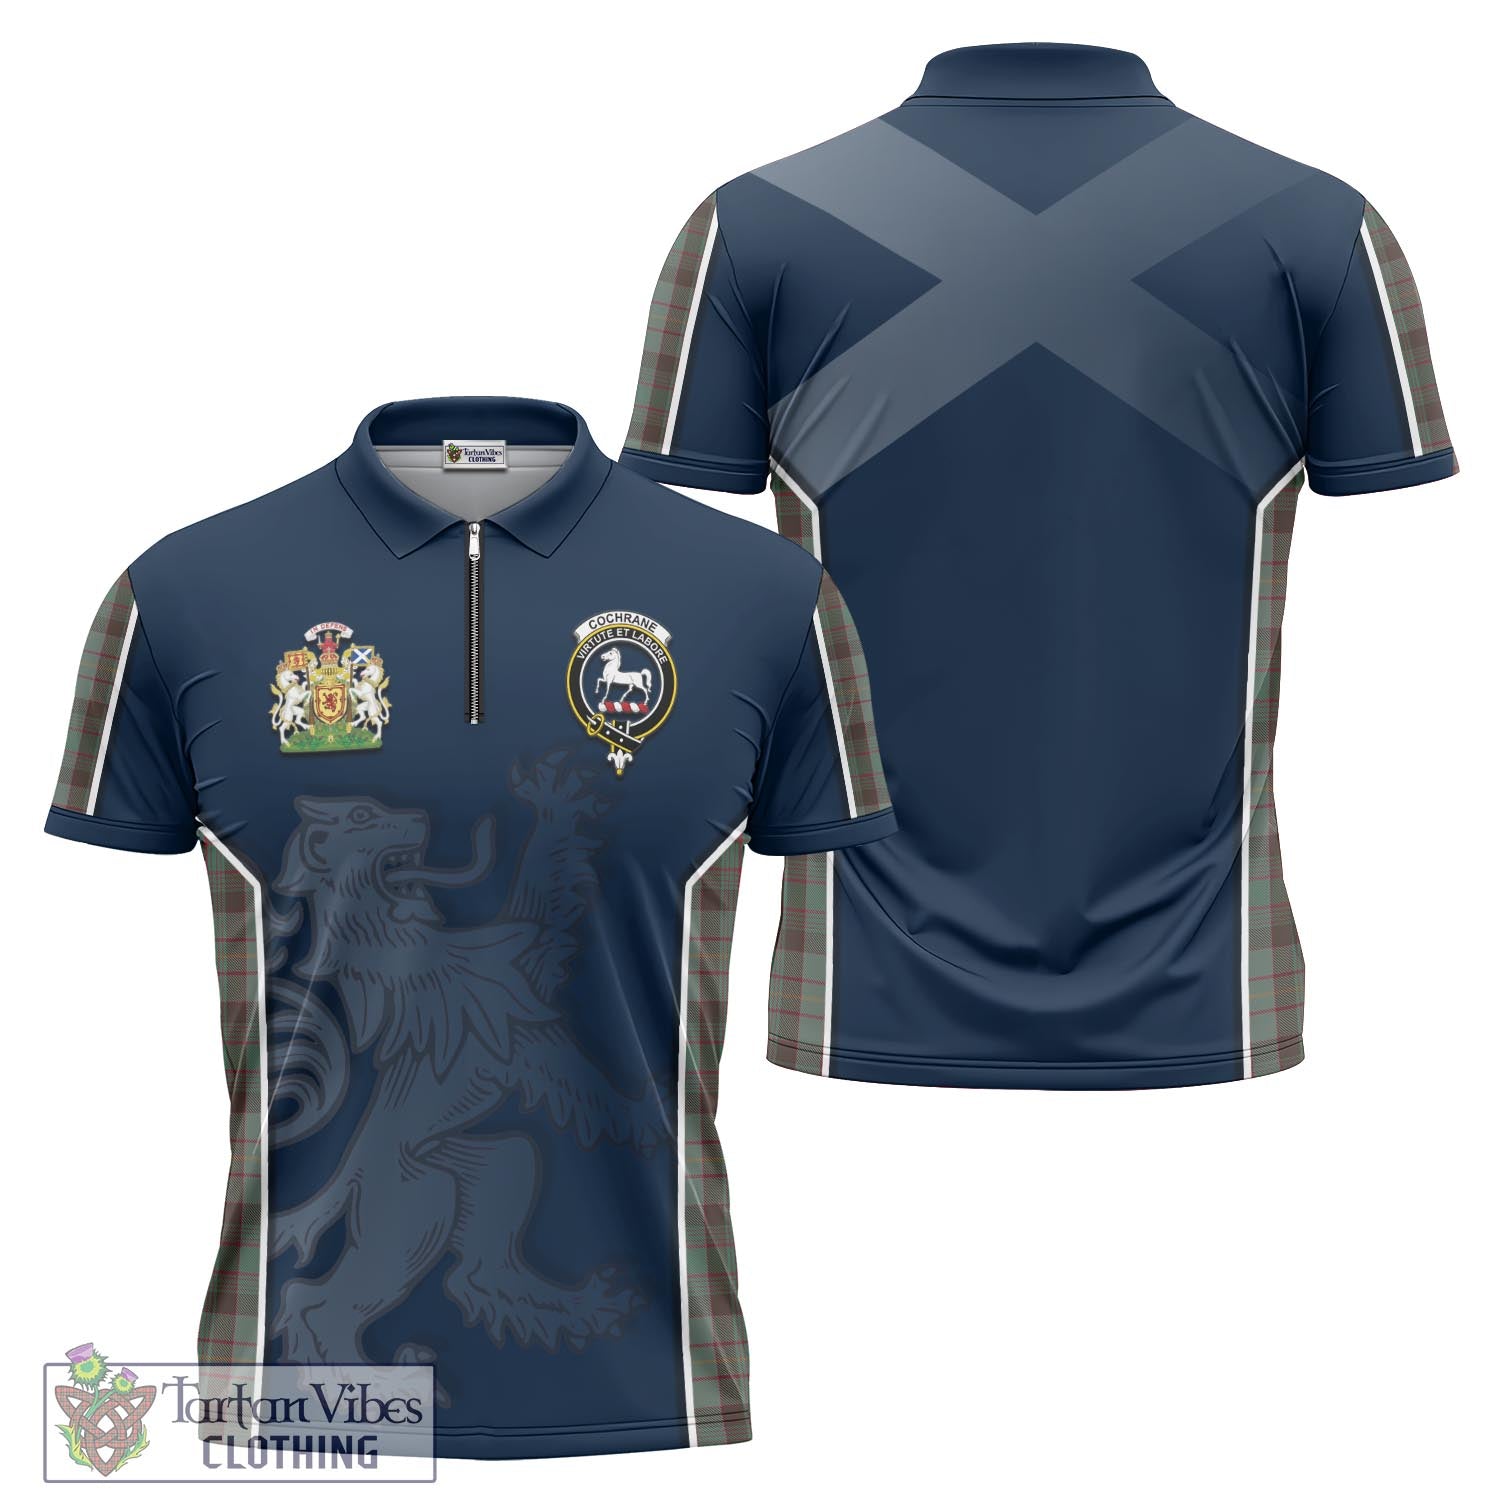 Tartan Vibes Clothing Cochrane Hunting Tartan Zipper Polo Shirt with Family Crest and Lion Rampant Vibes Sport Style